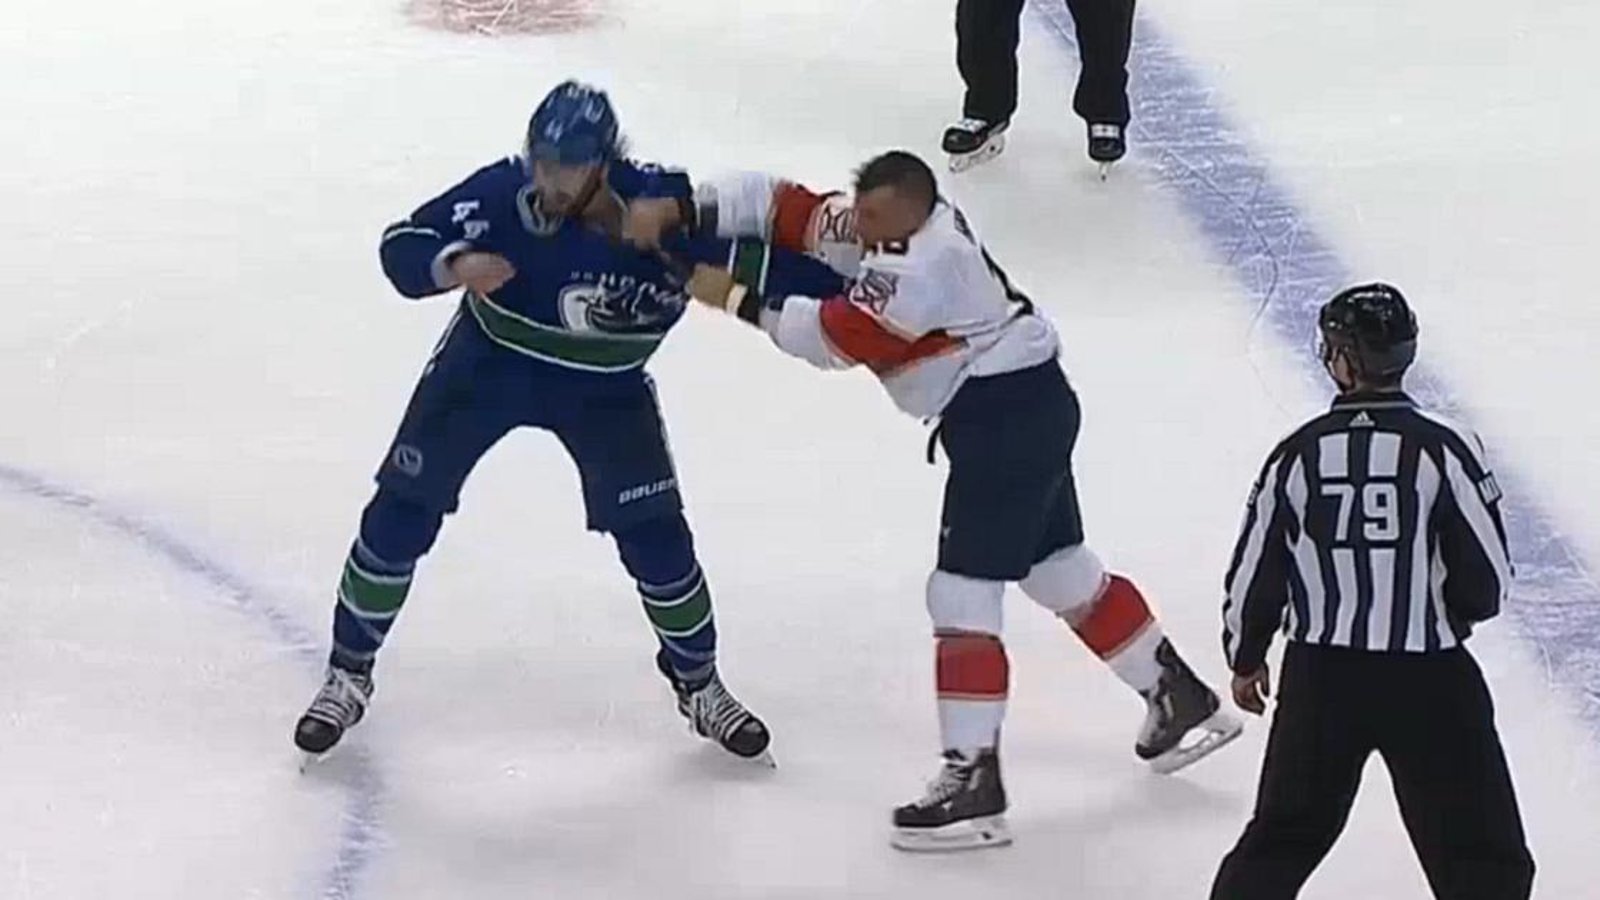 Gudbranson and Haley go back and forth in spirited fight.